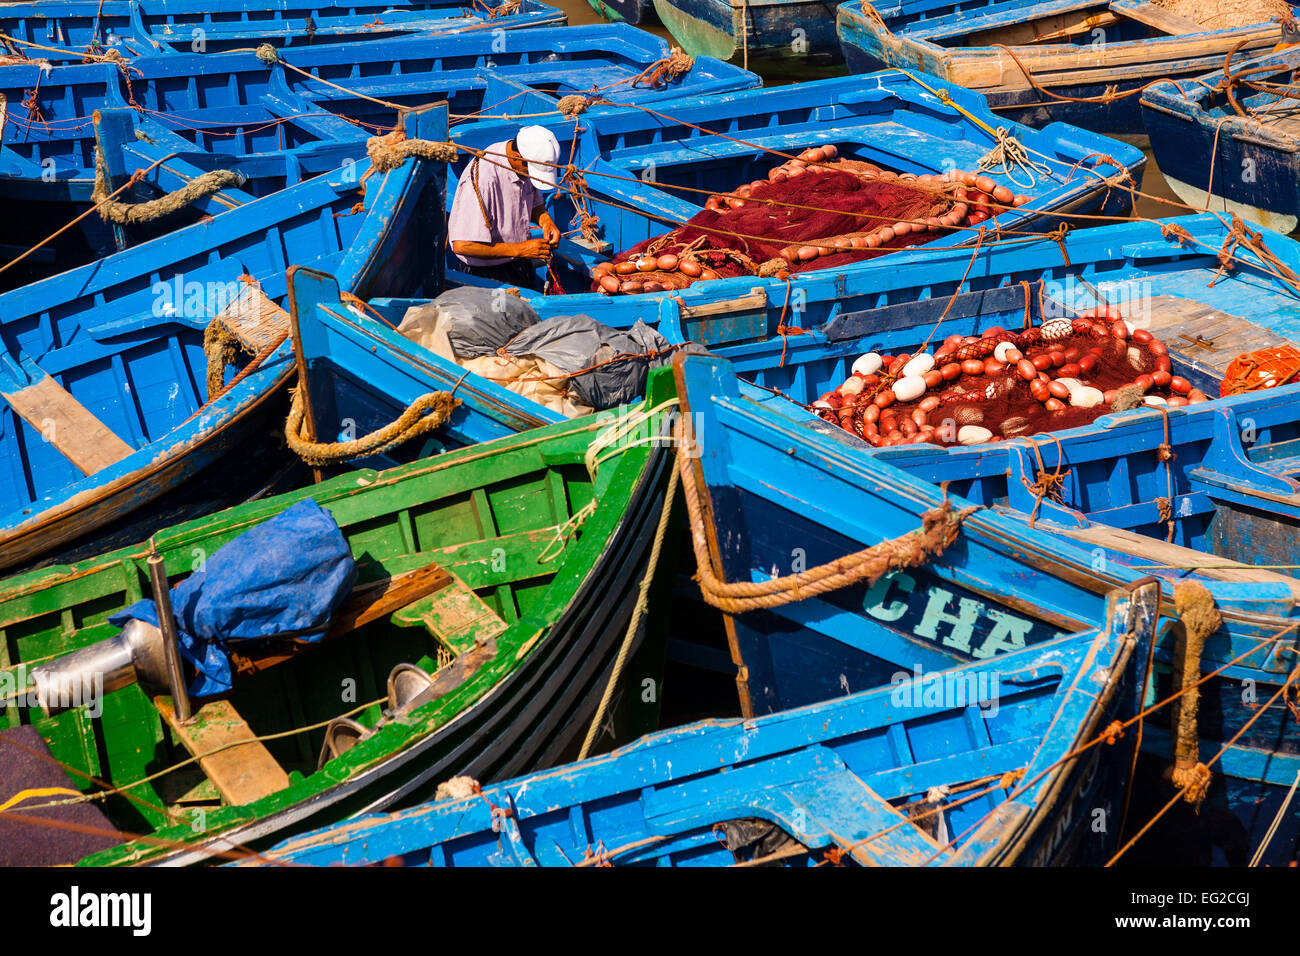 Fisherman working on a blue boat in the port of Essaouira, Morocco Stock Photo